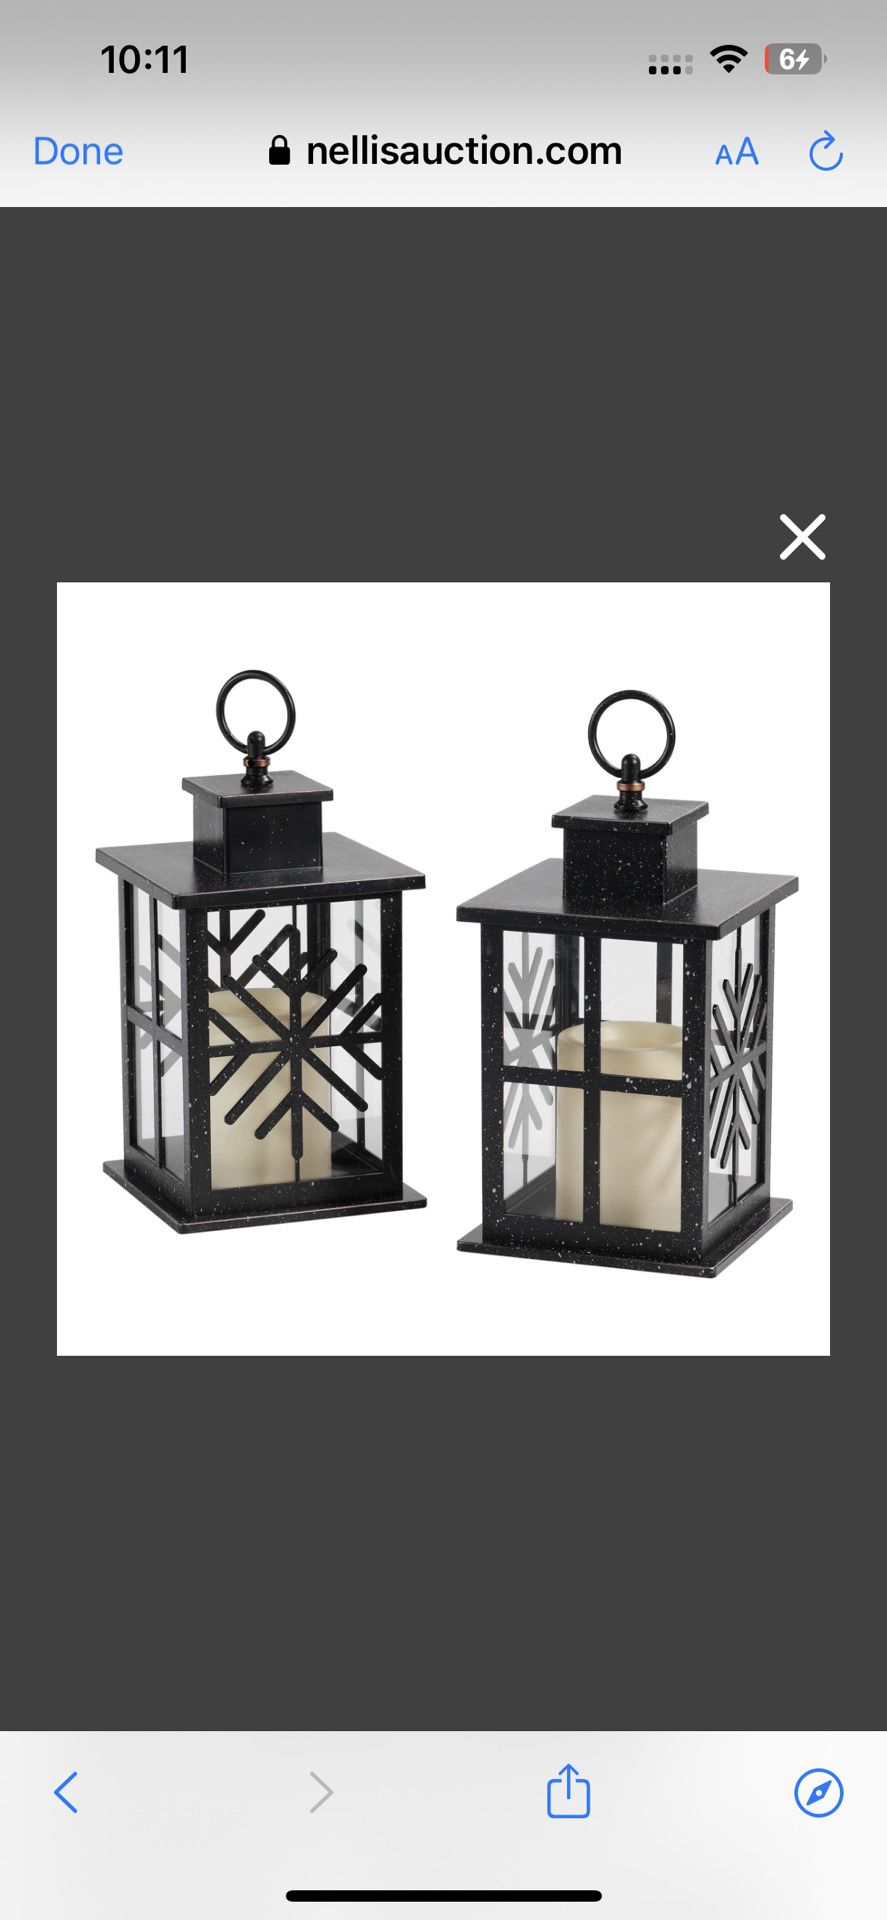 Back WON  Photo 1 of 11 High ABS and Glass Decorative Hanging Lanterns, Set of 2 - Black Lanterns with LED Flickering Candles, 6-Hour Timer, Battery P